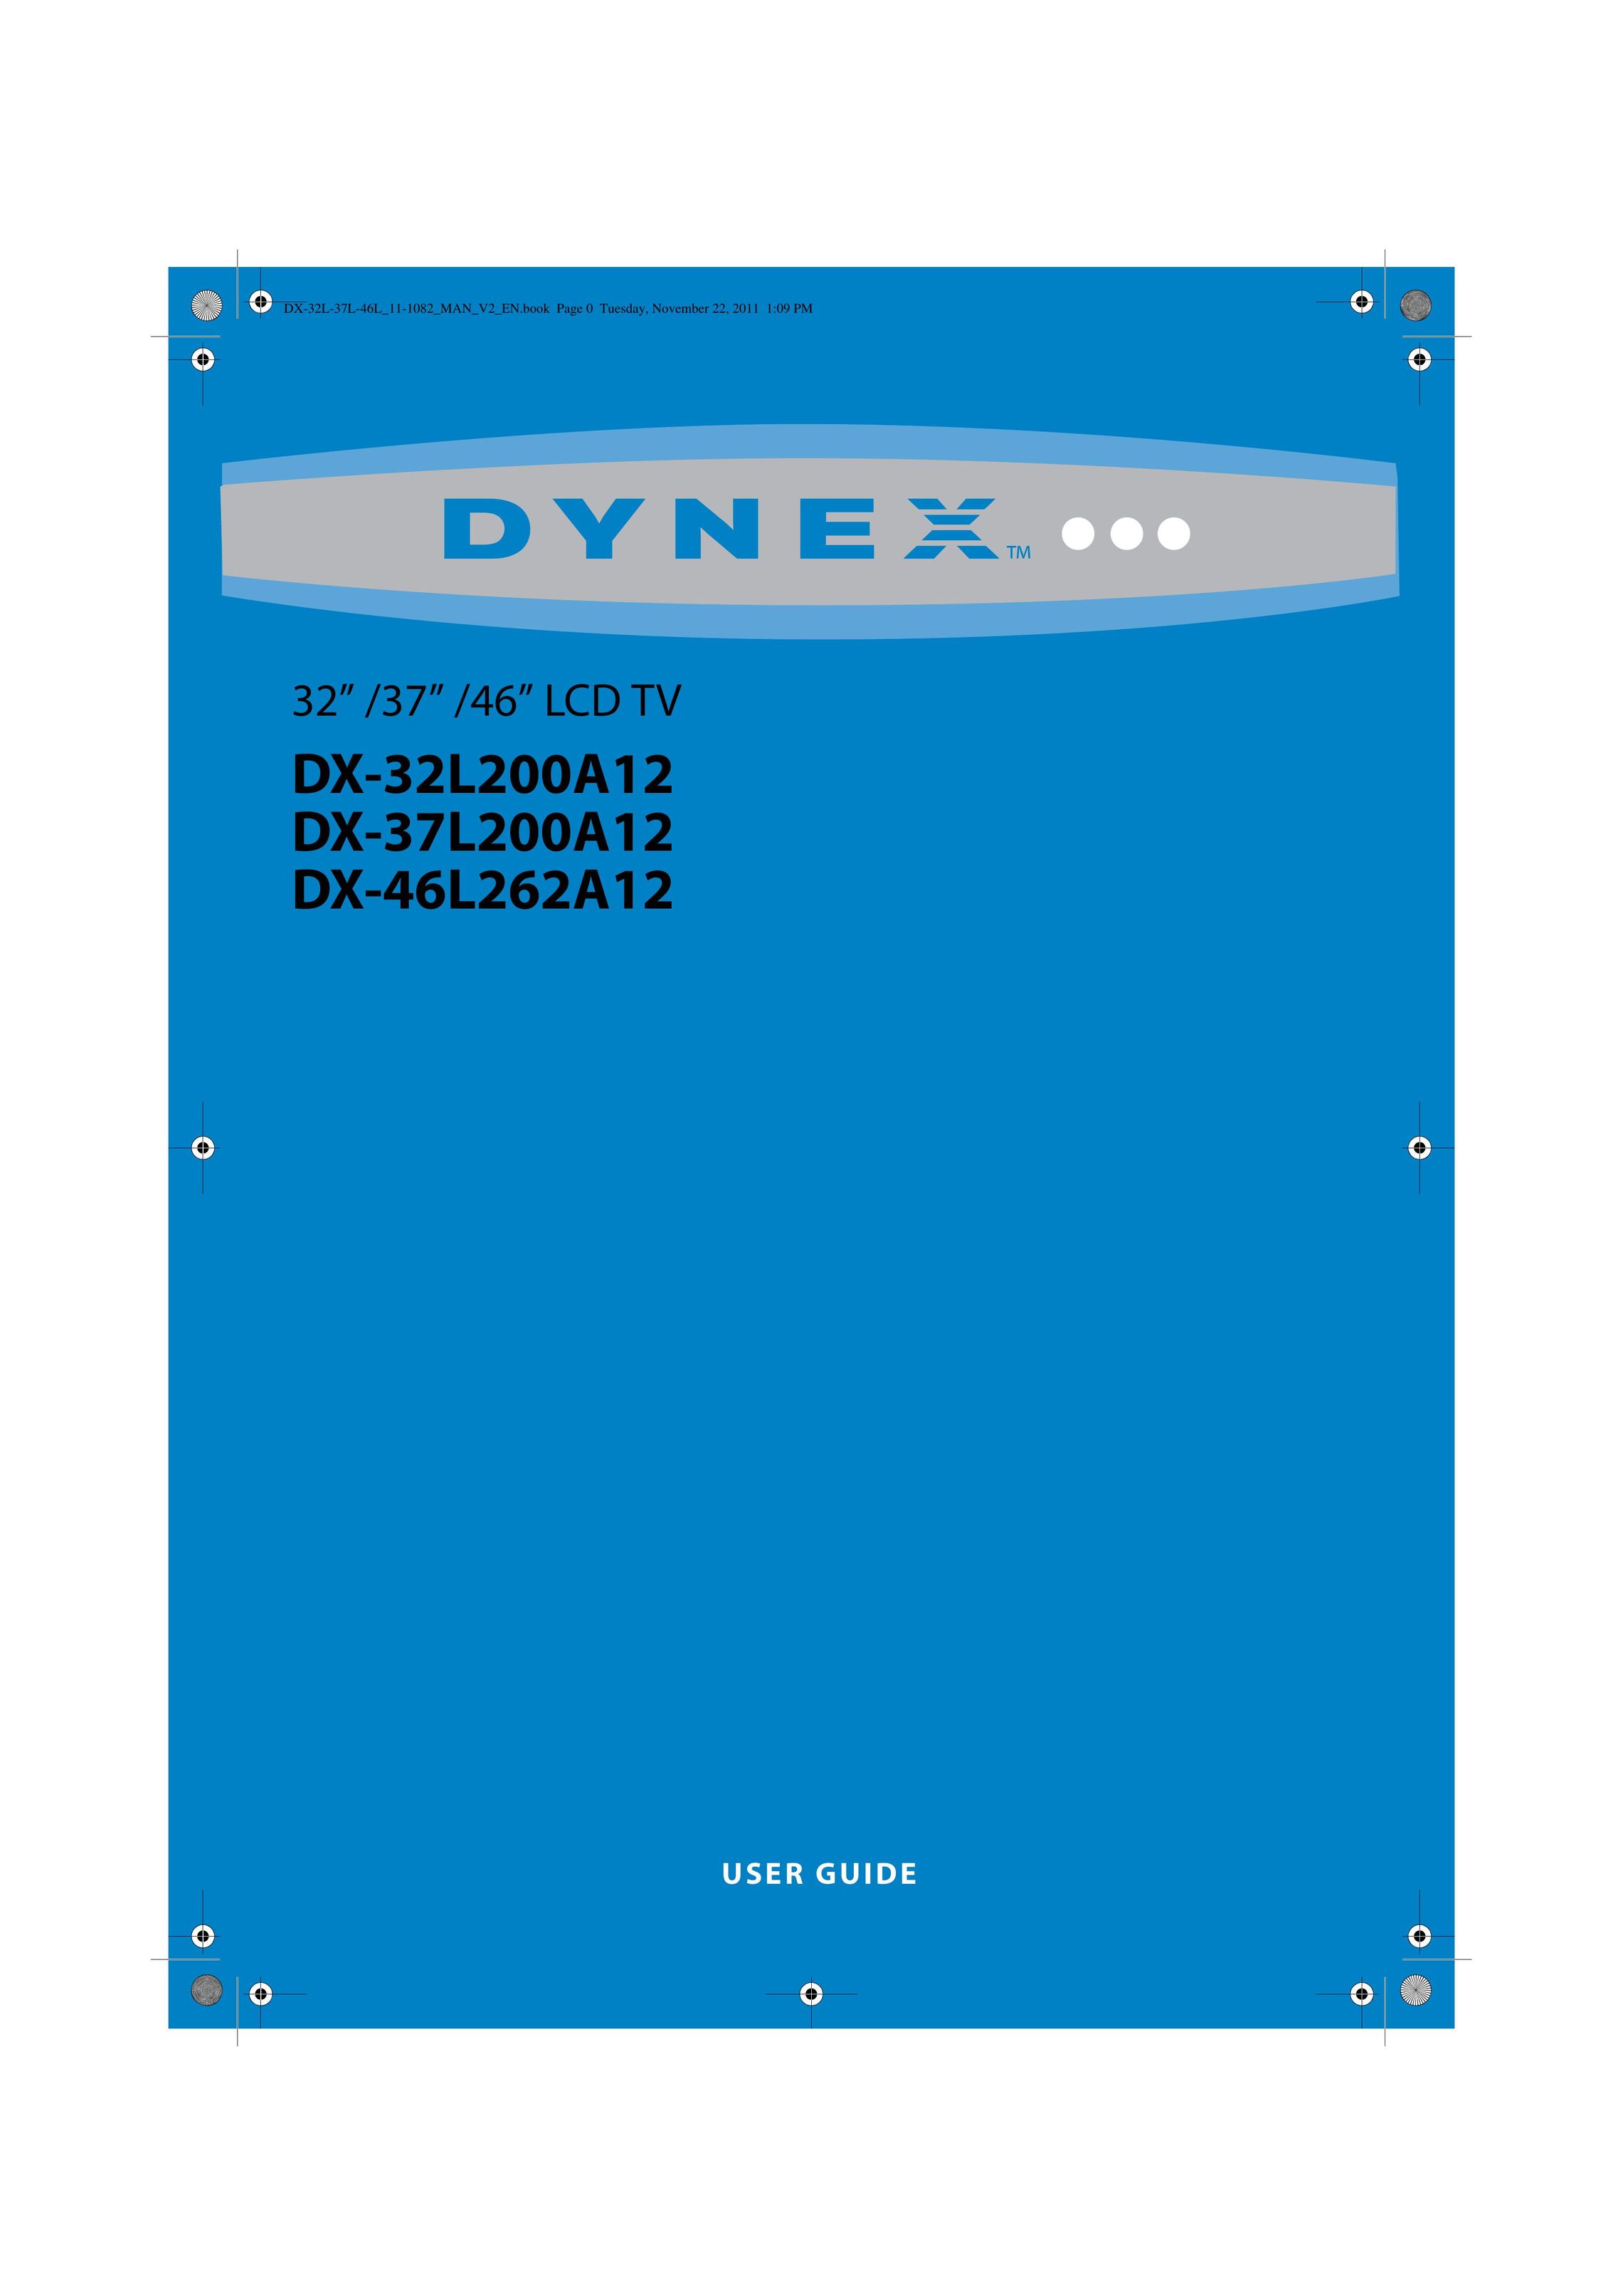 Dynex DX-46L262A12 Home Theater Screen User Manual (Page 1)